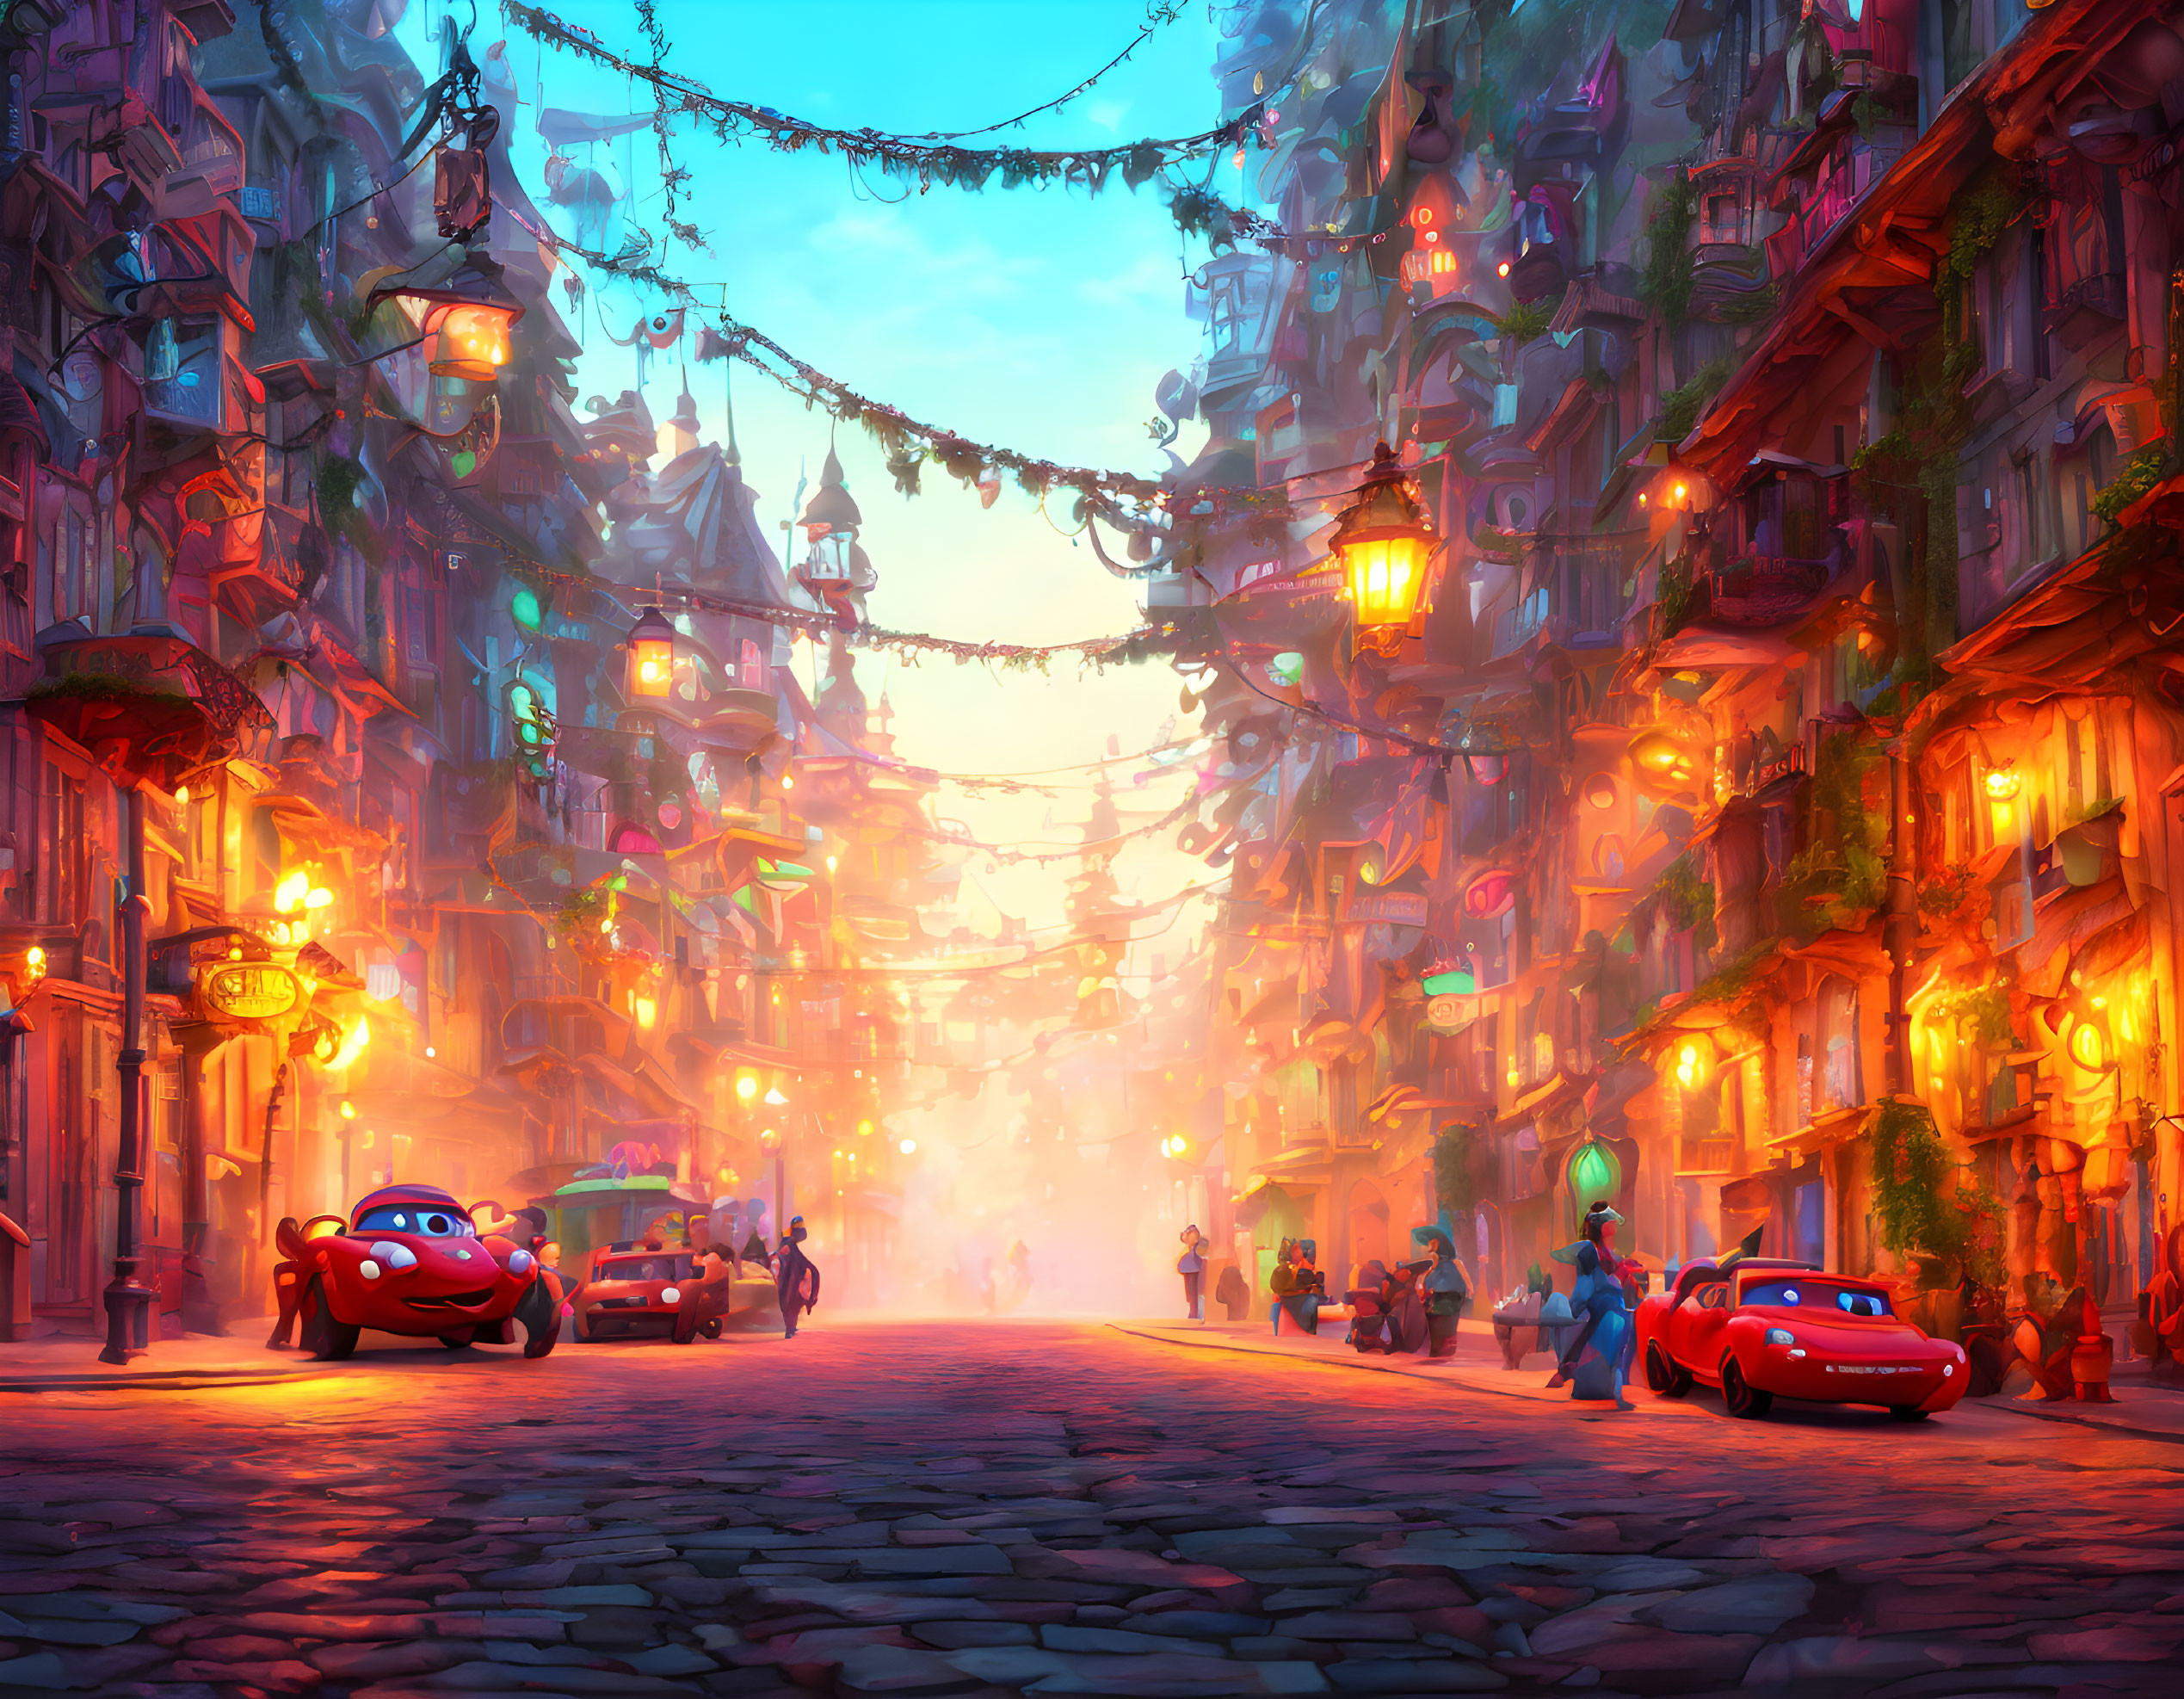 Colorful Dusk Street Scene with Animated Cars and Buildings